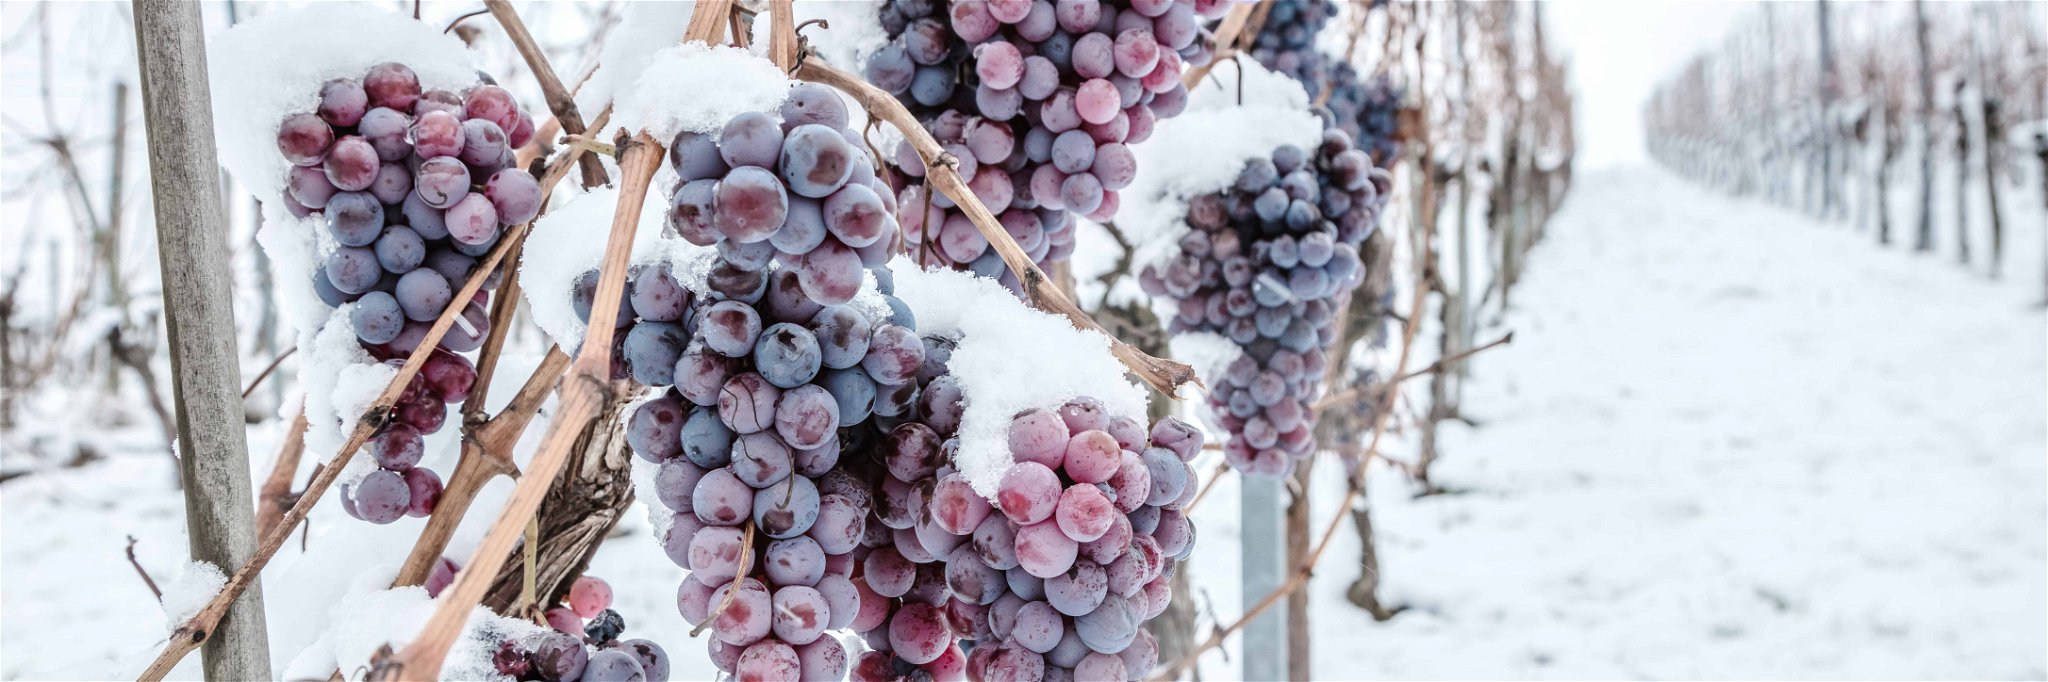 The ice wine harvest has begun in Germany.